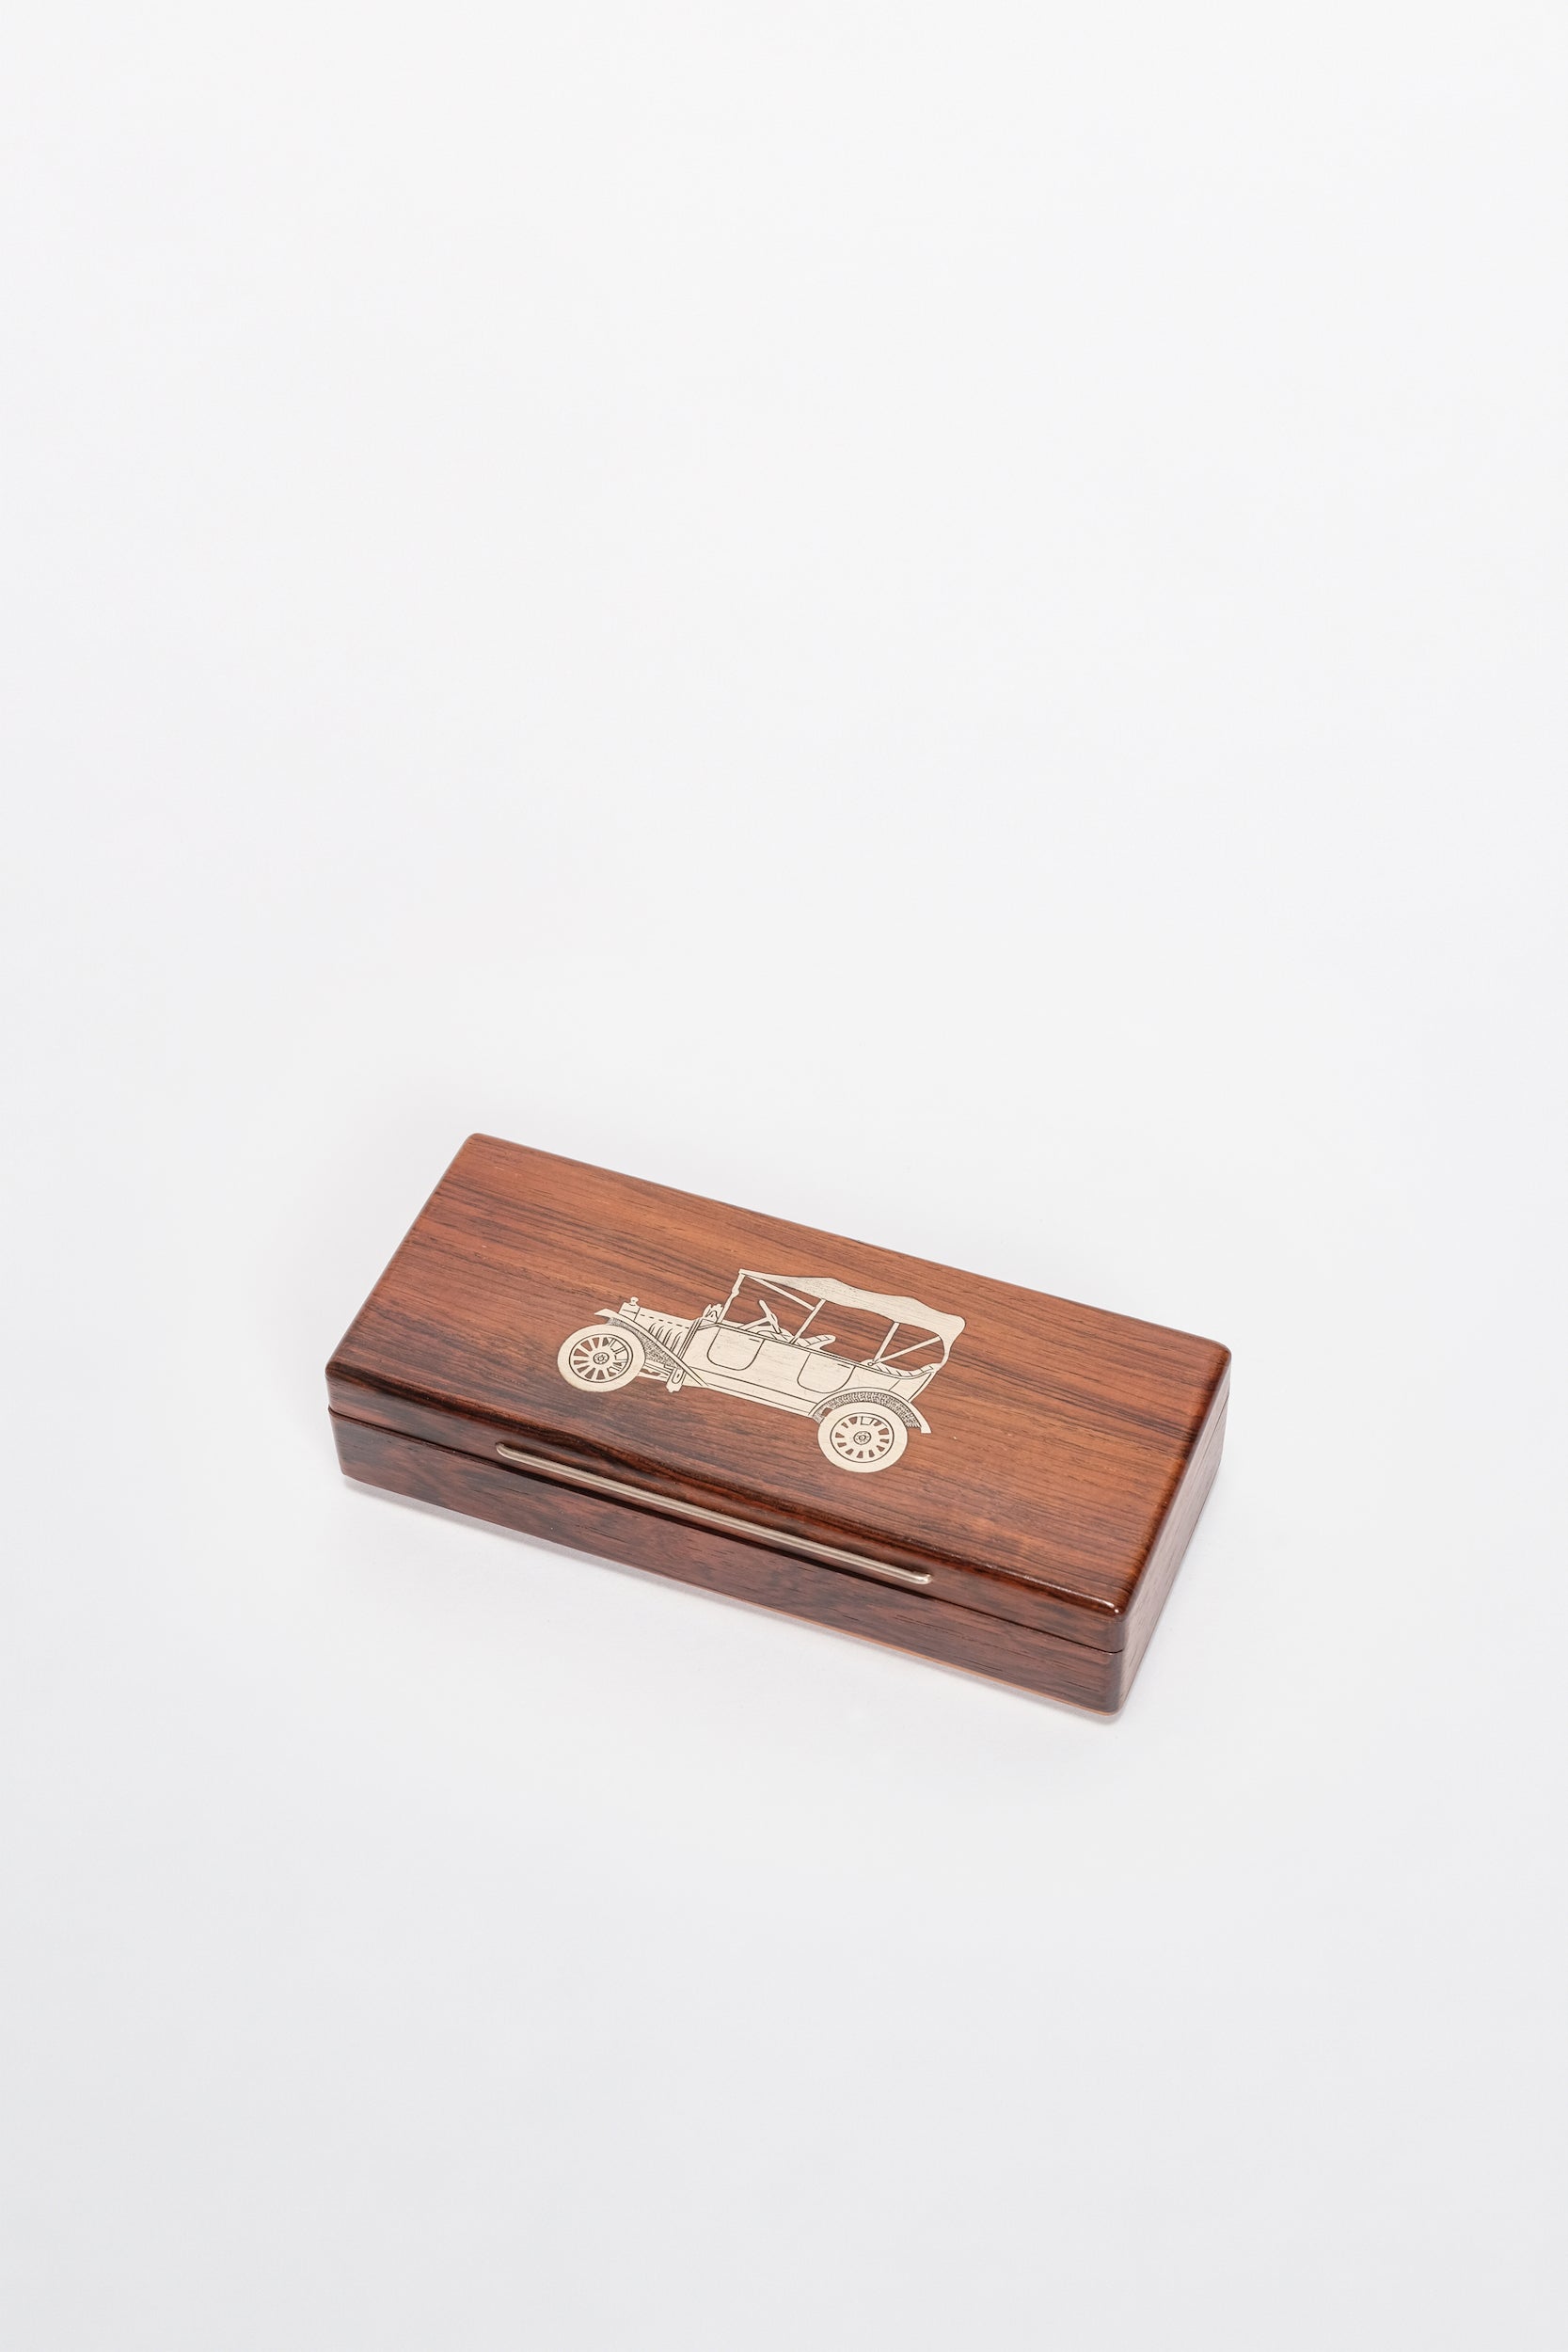 Cigarette Box with Sterling Silver Inlays